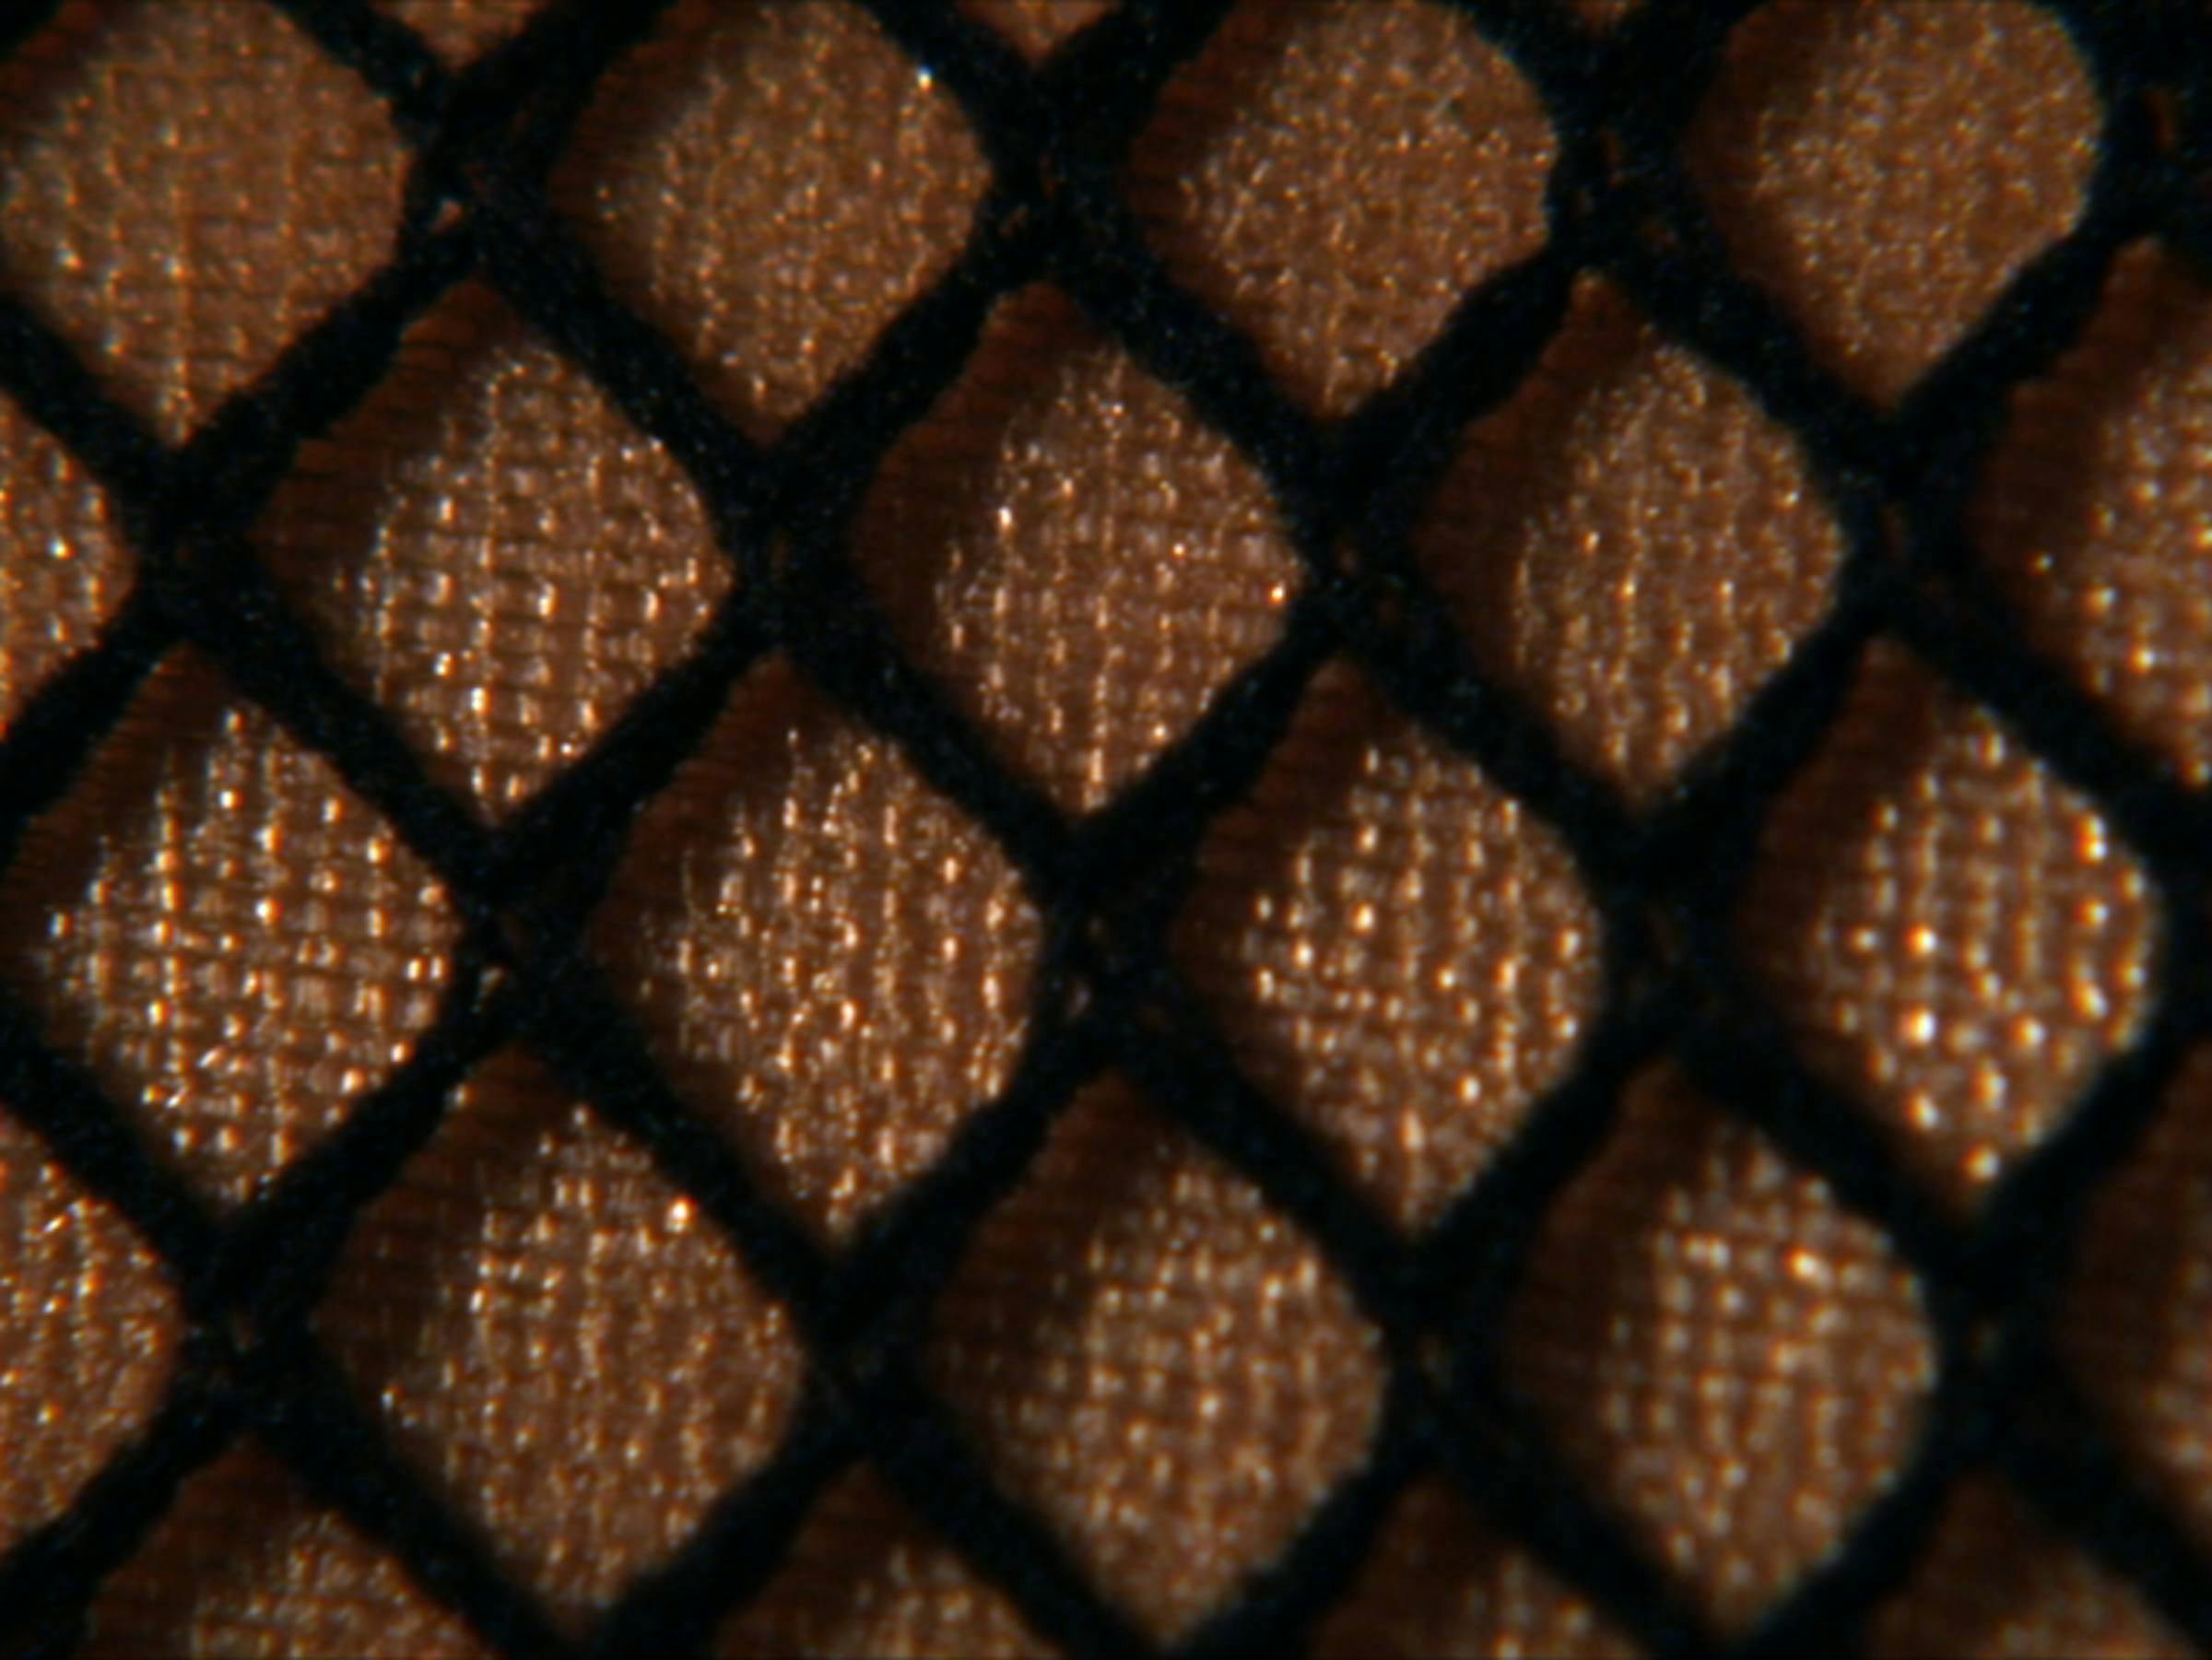 an image of a close up of fish net material on top of brown-gold shiny fabric